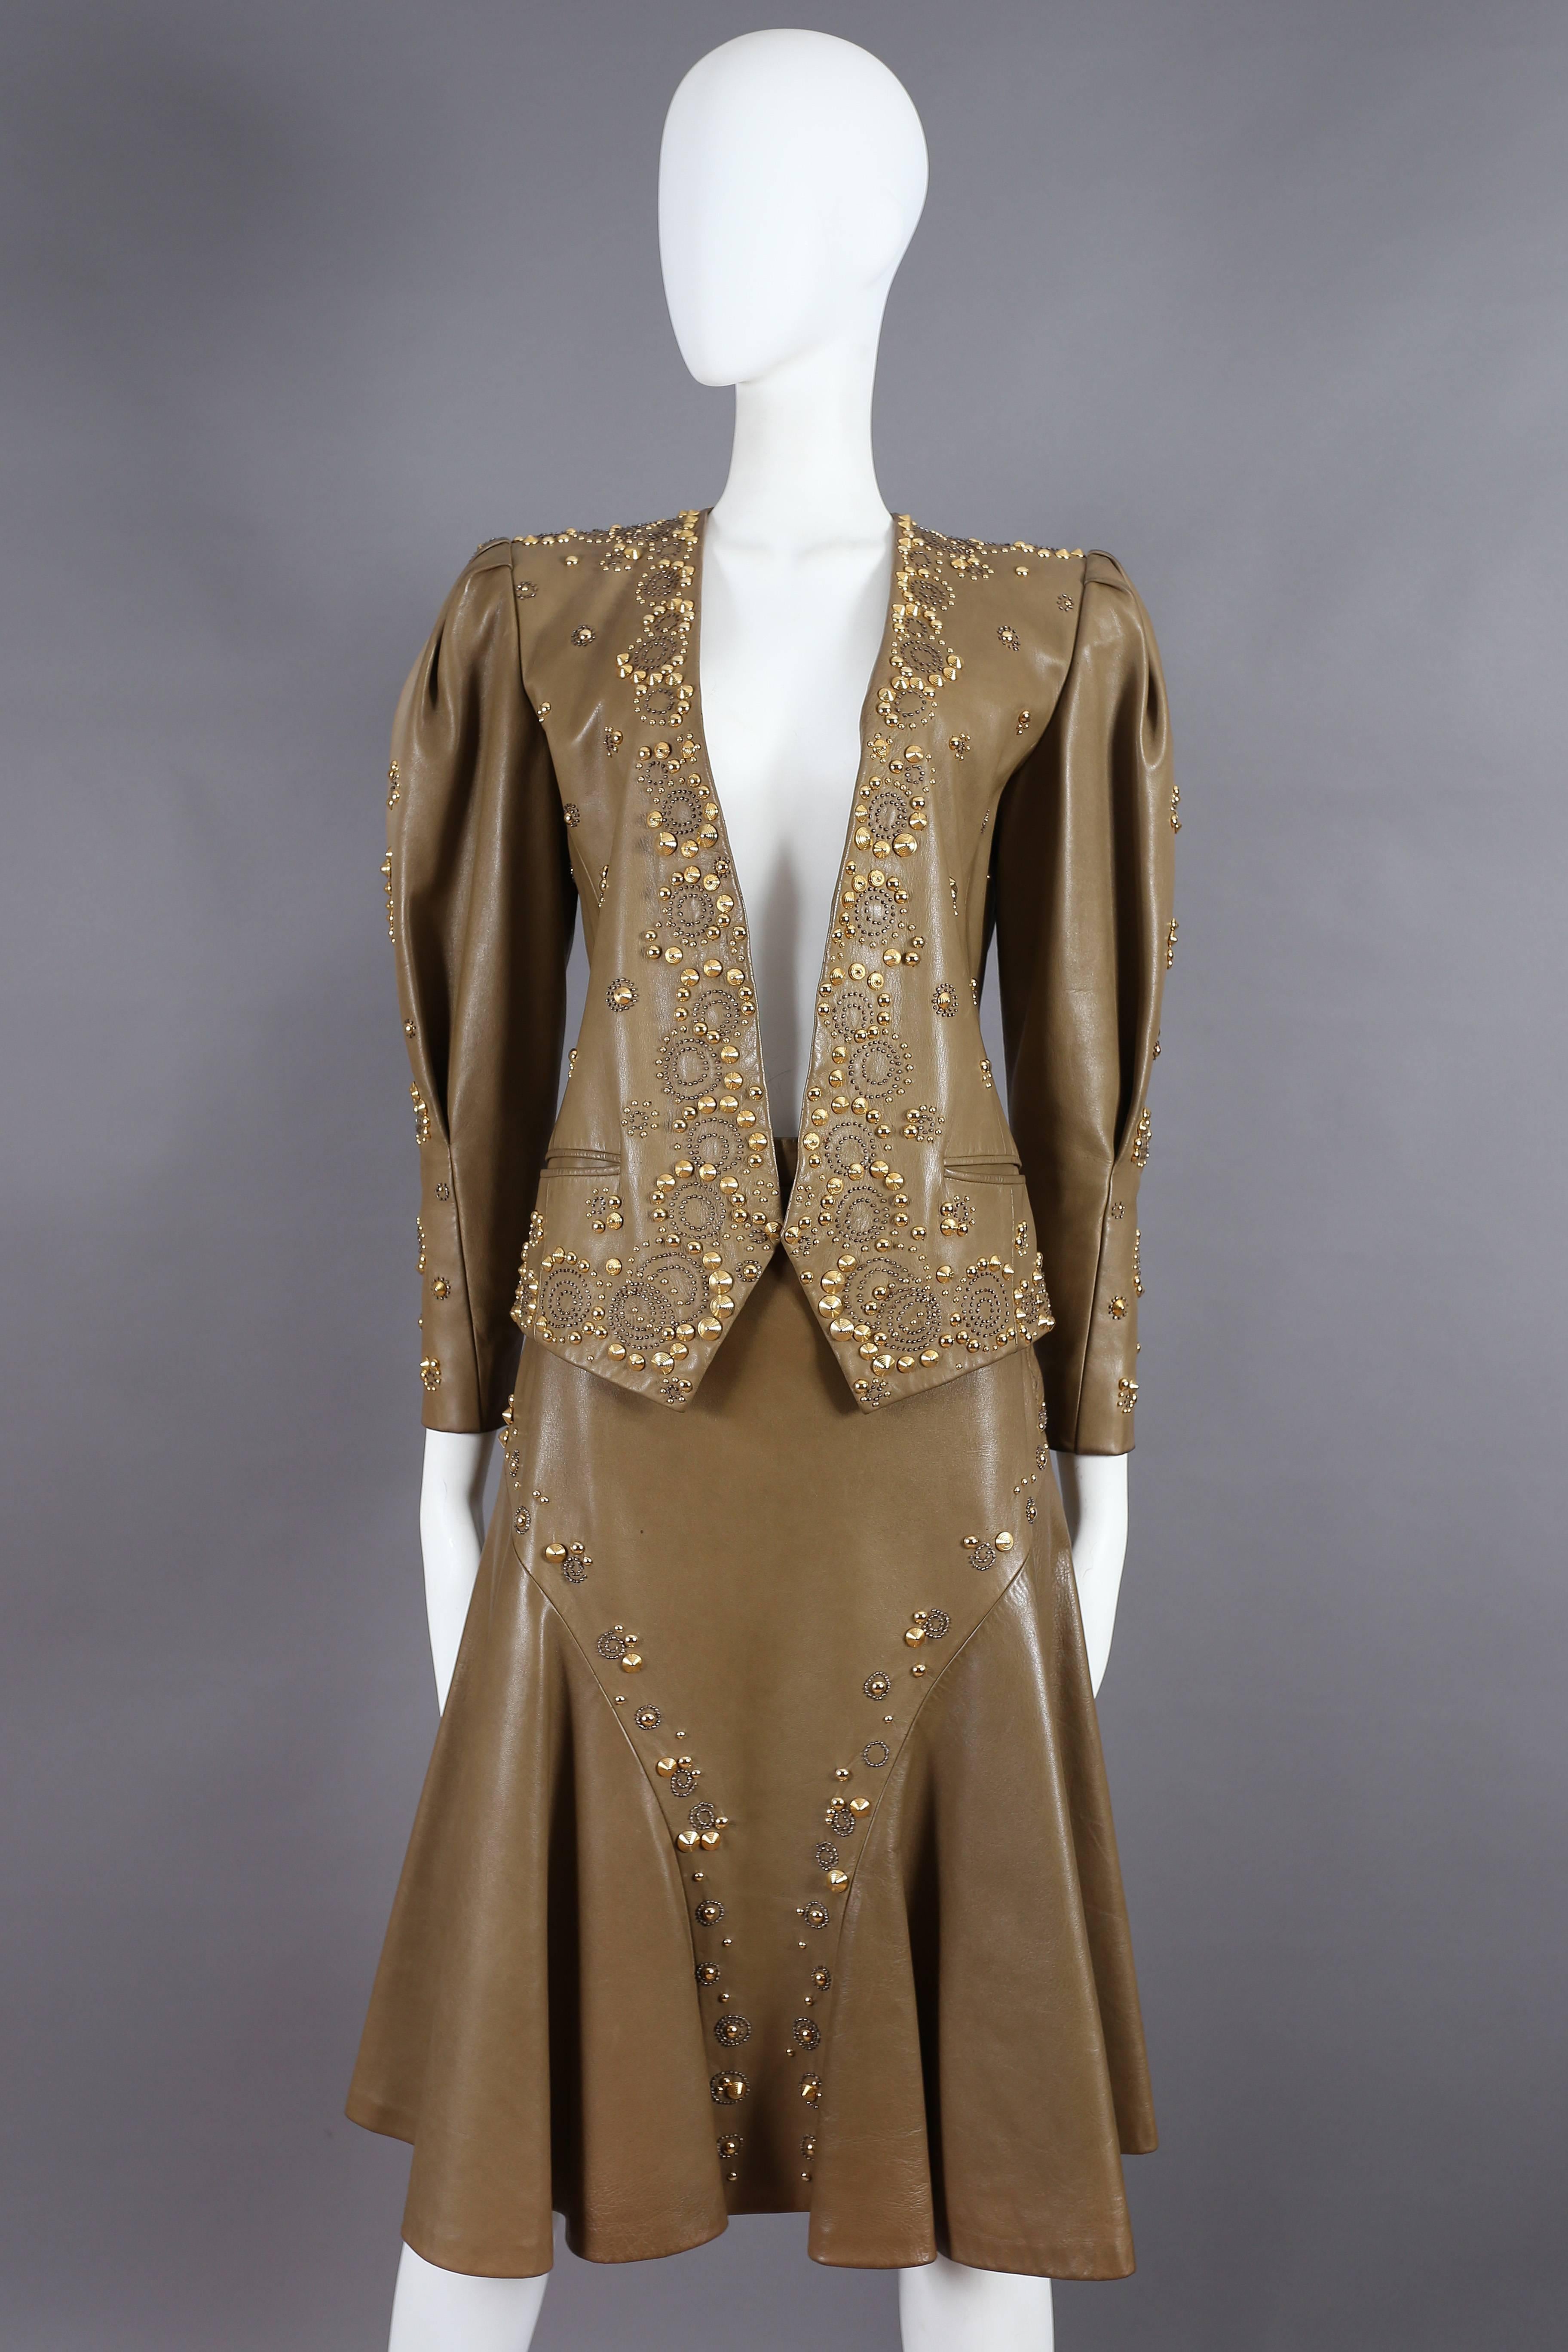 Exquisite Ted Lapidus olive green leather skirt suit, circa 1970s. The suit features western style gold studs throughout and silk lining.